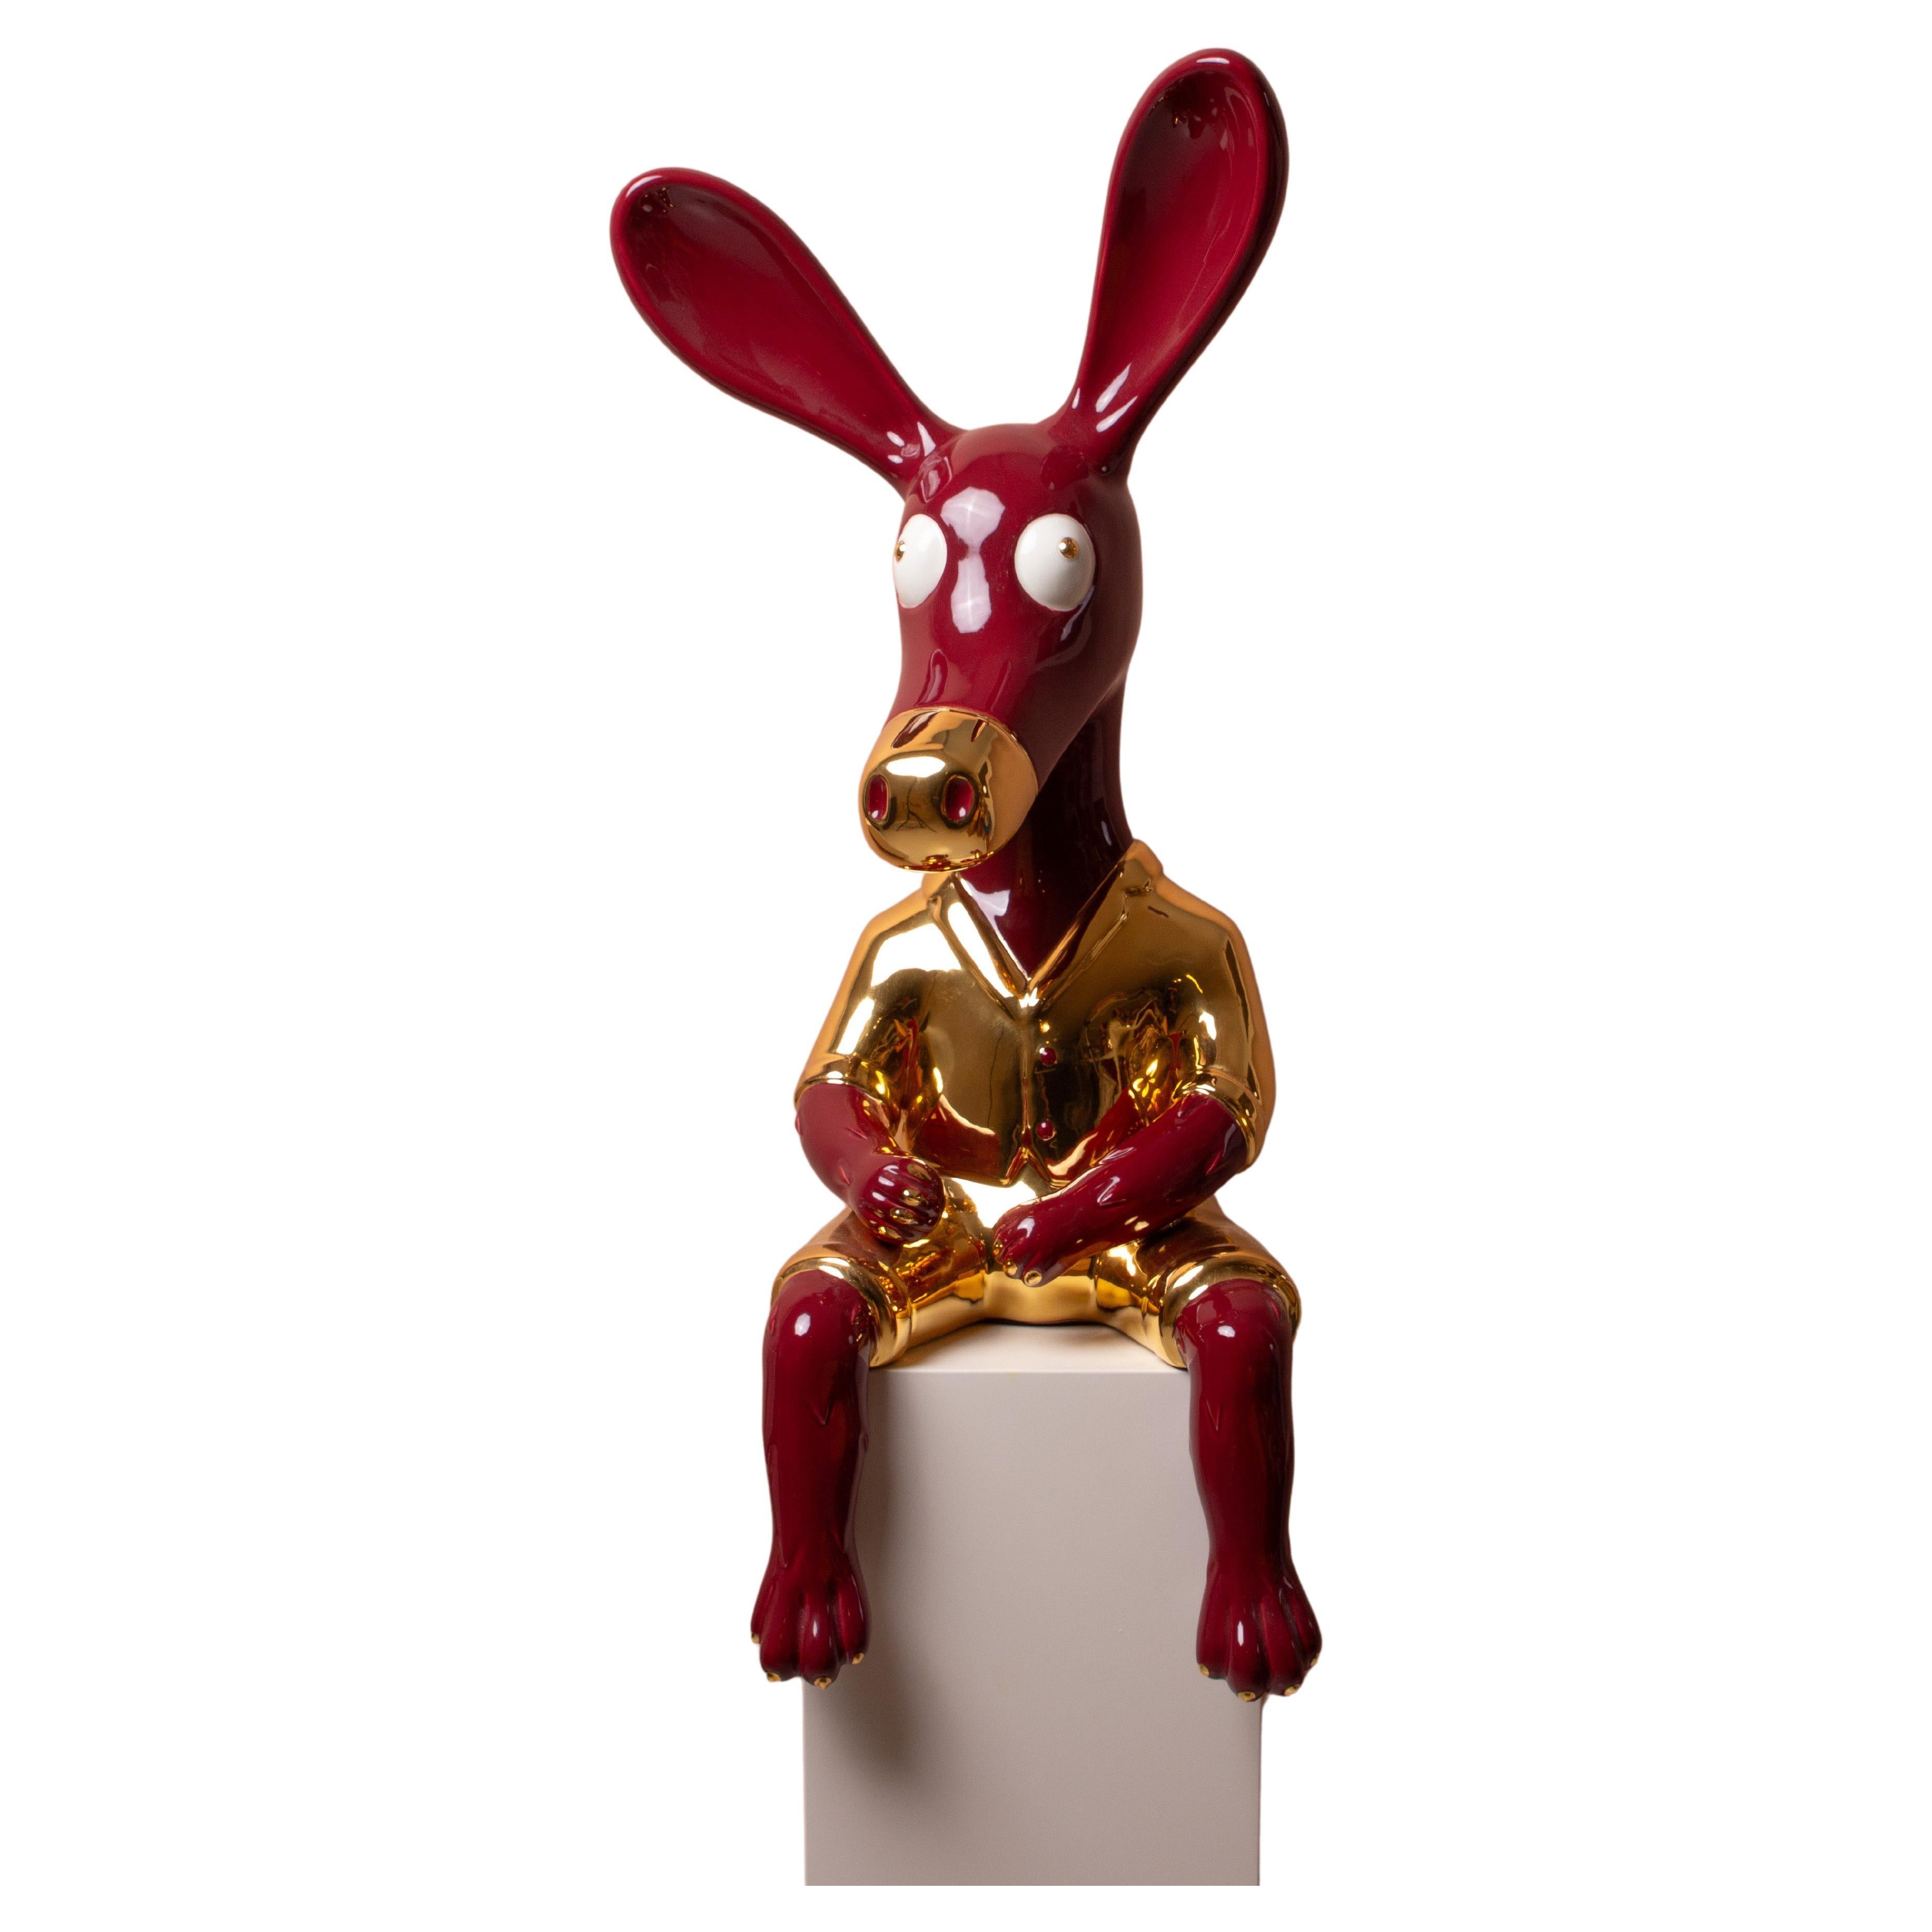 Cherry ang gold donky sculpture, ceramic and 24k gold finish For Sale